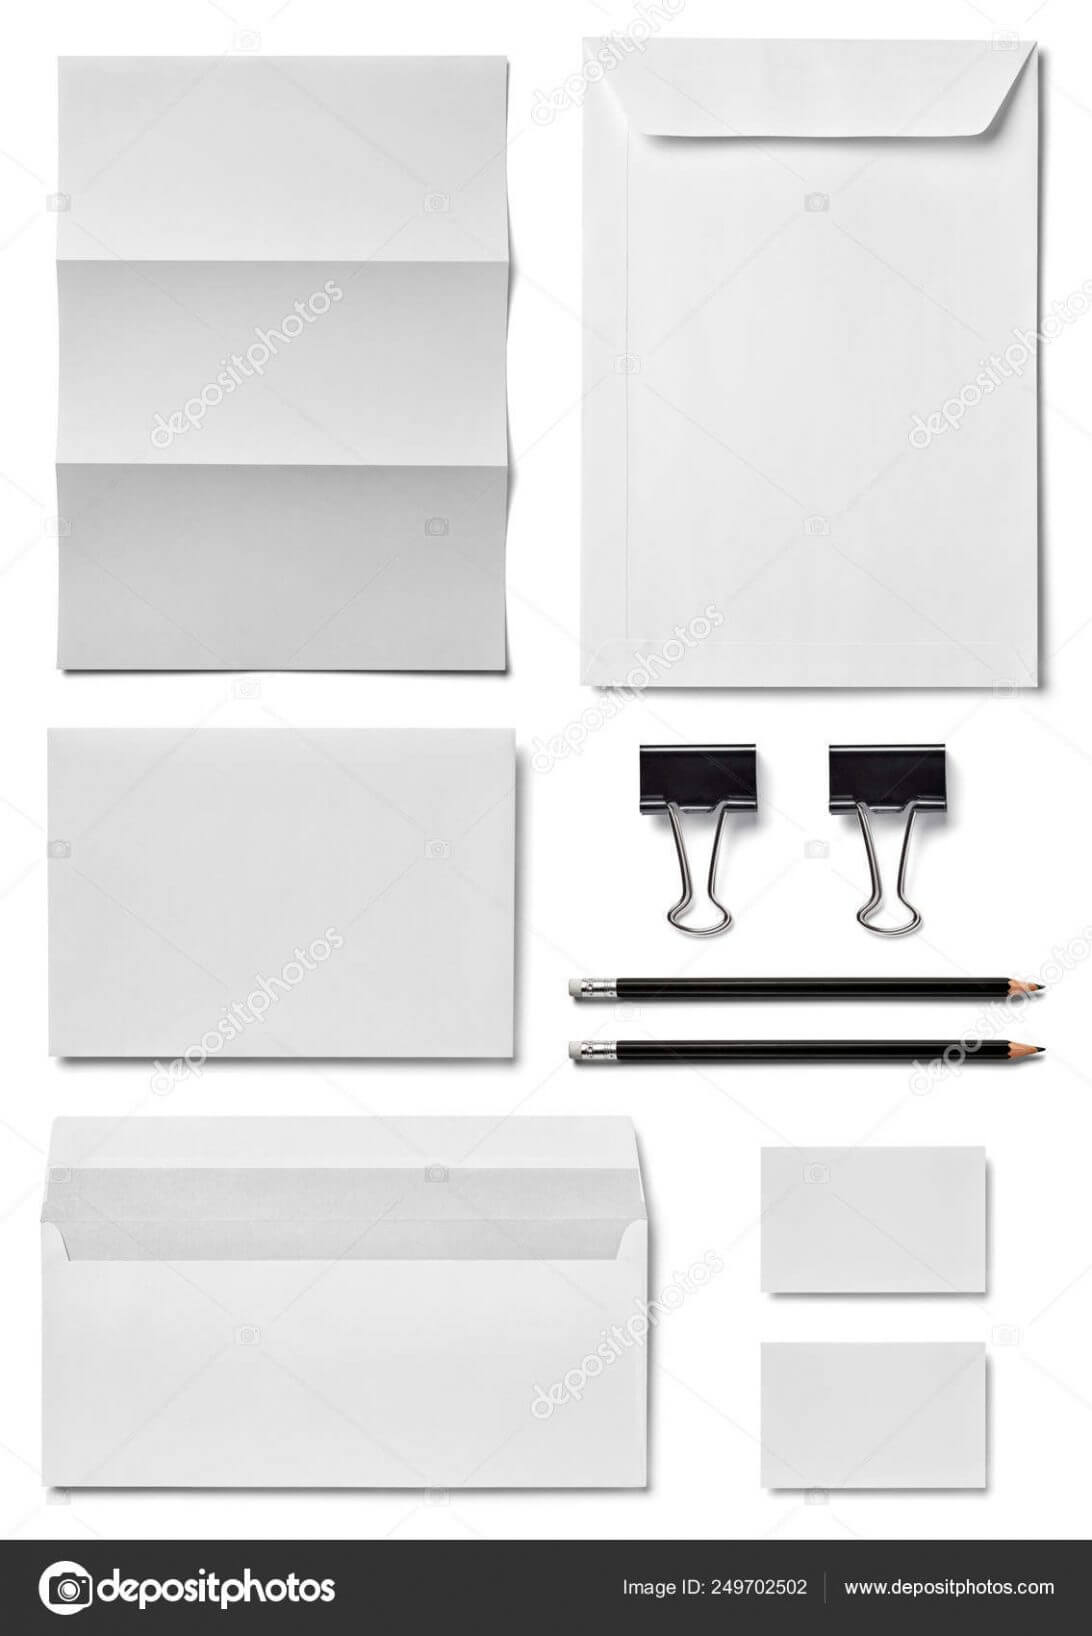 Business Envelope Template Design Illustrator Microsoft Word Intended For Plain Business Card Template Microsoft Word